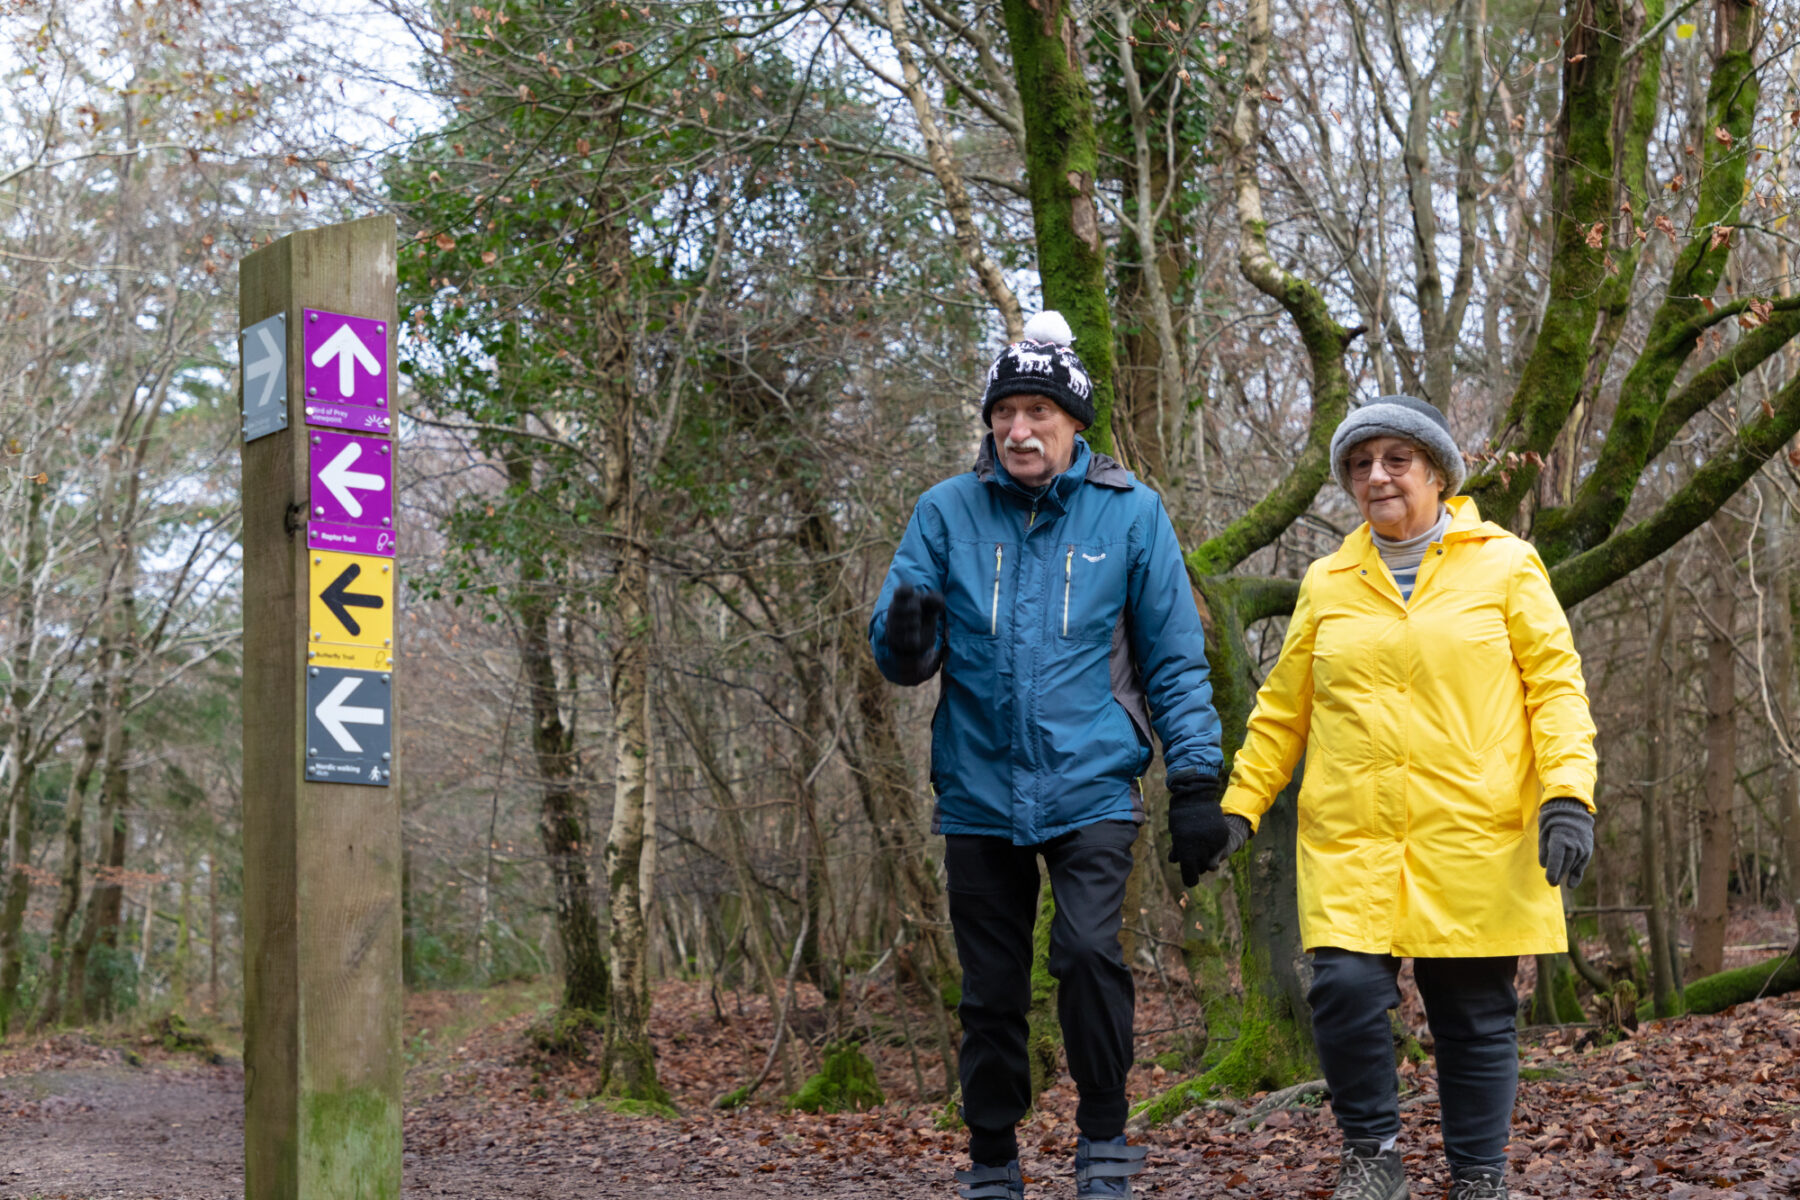 A couple walking on a forest trail in coats and bobble hats